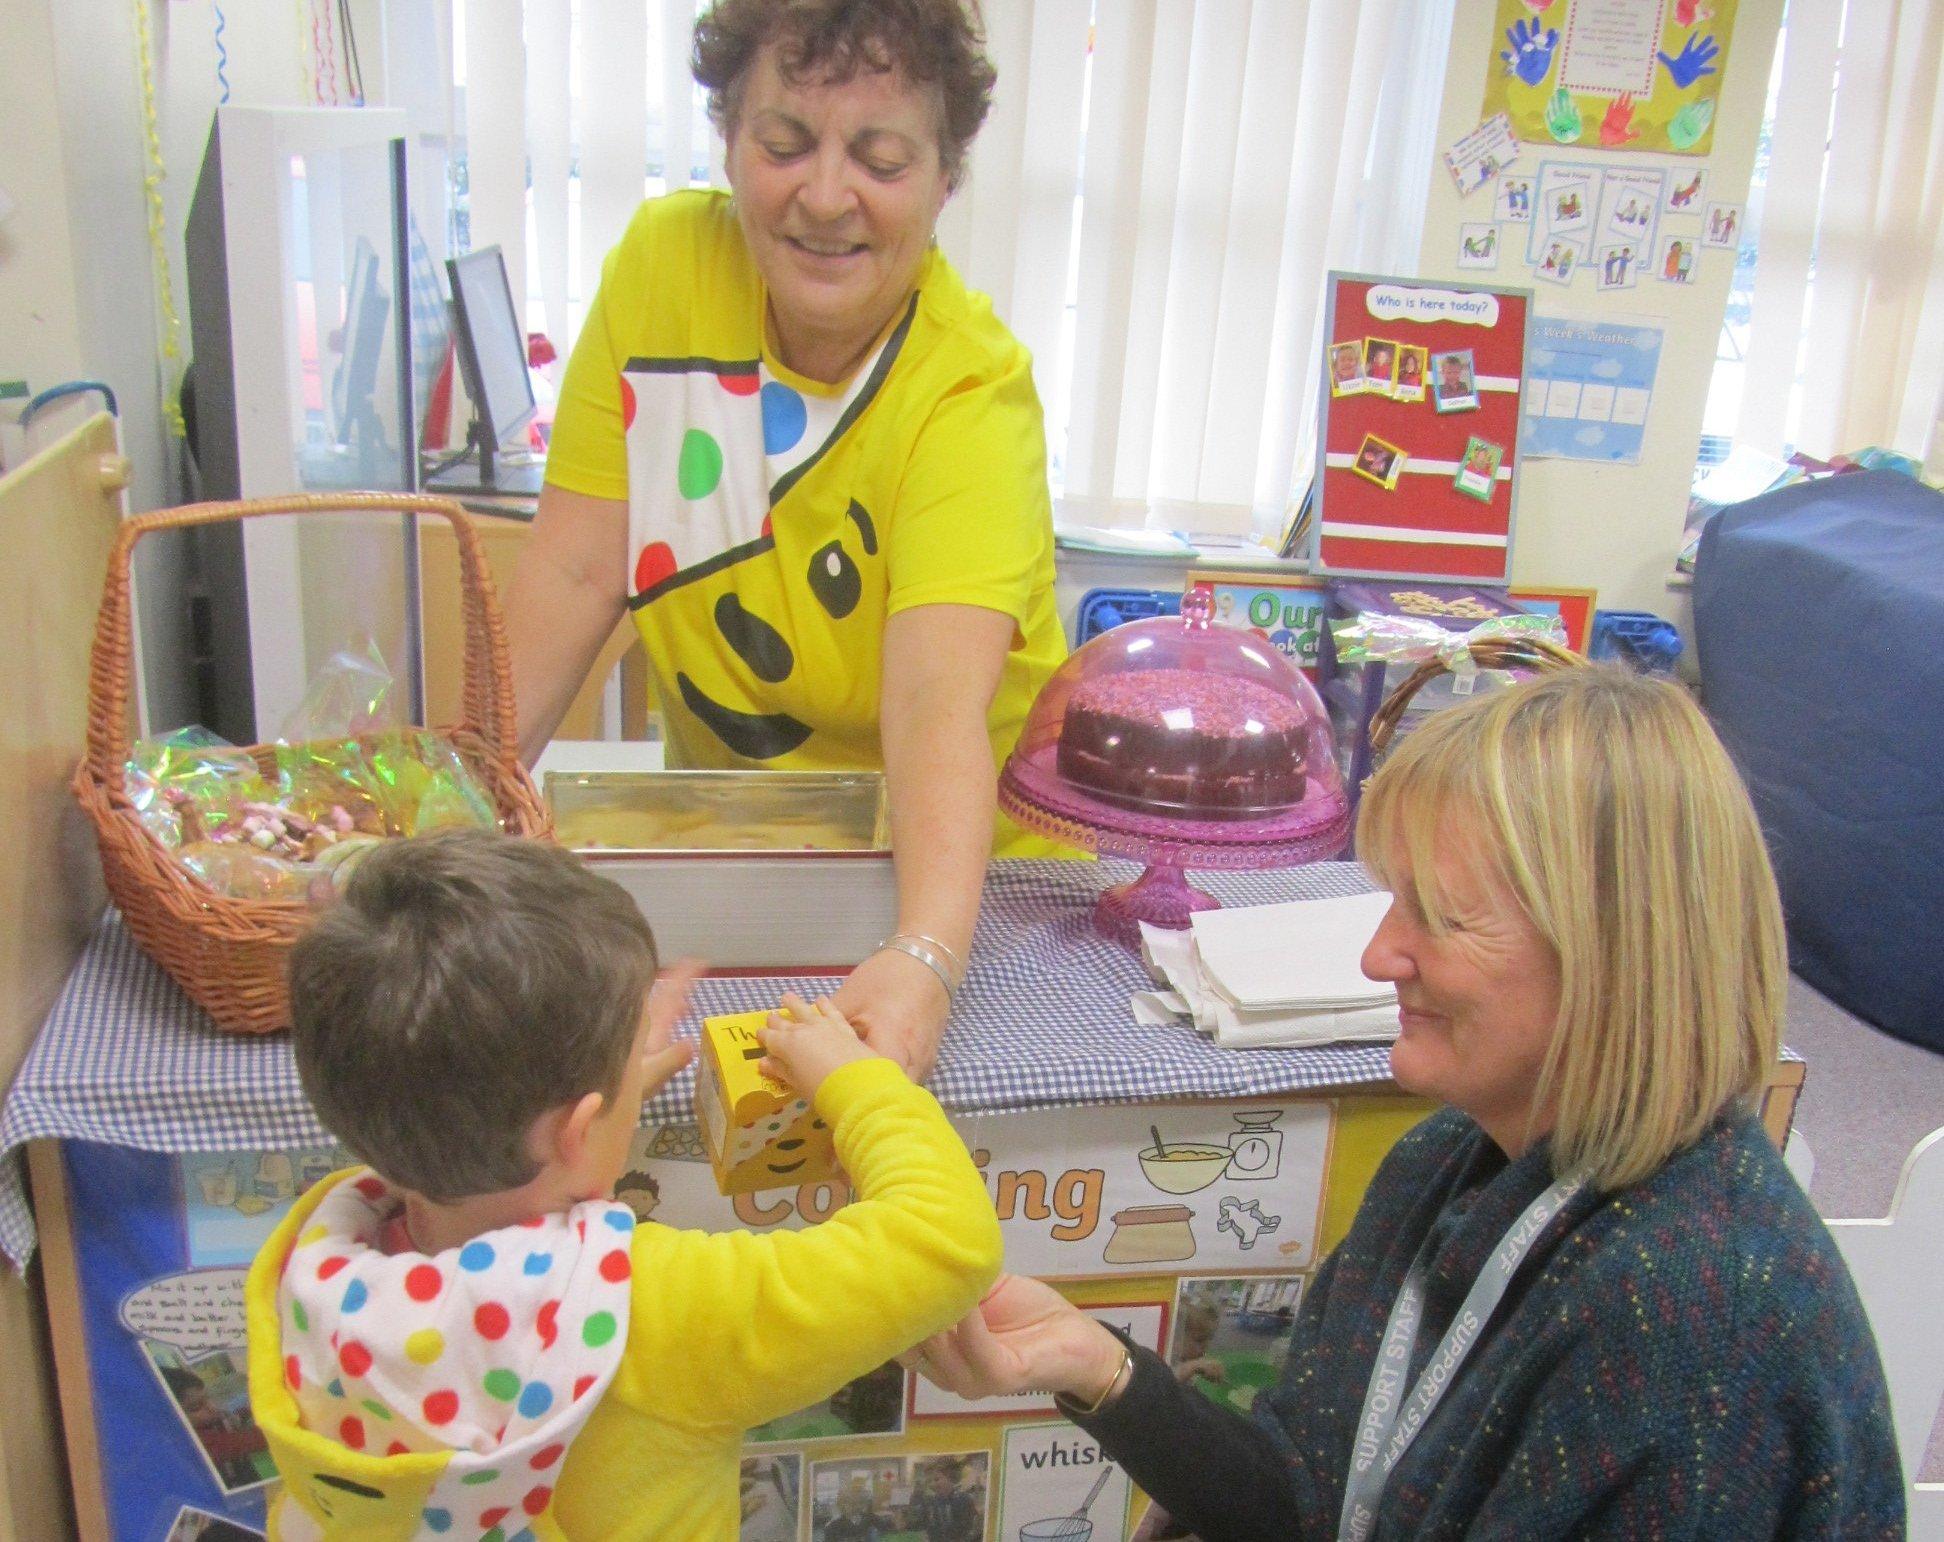 The bake sale at Our Lady of Sion Nursery